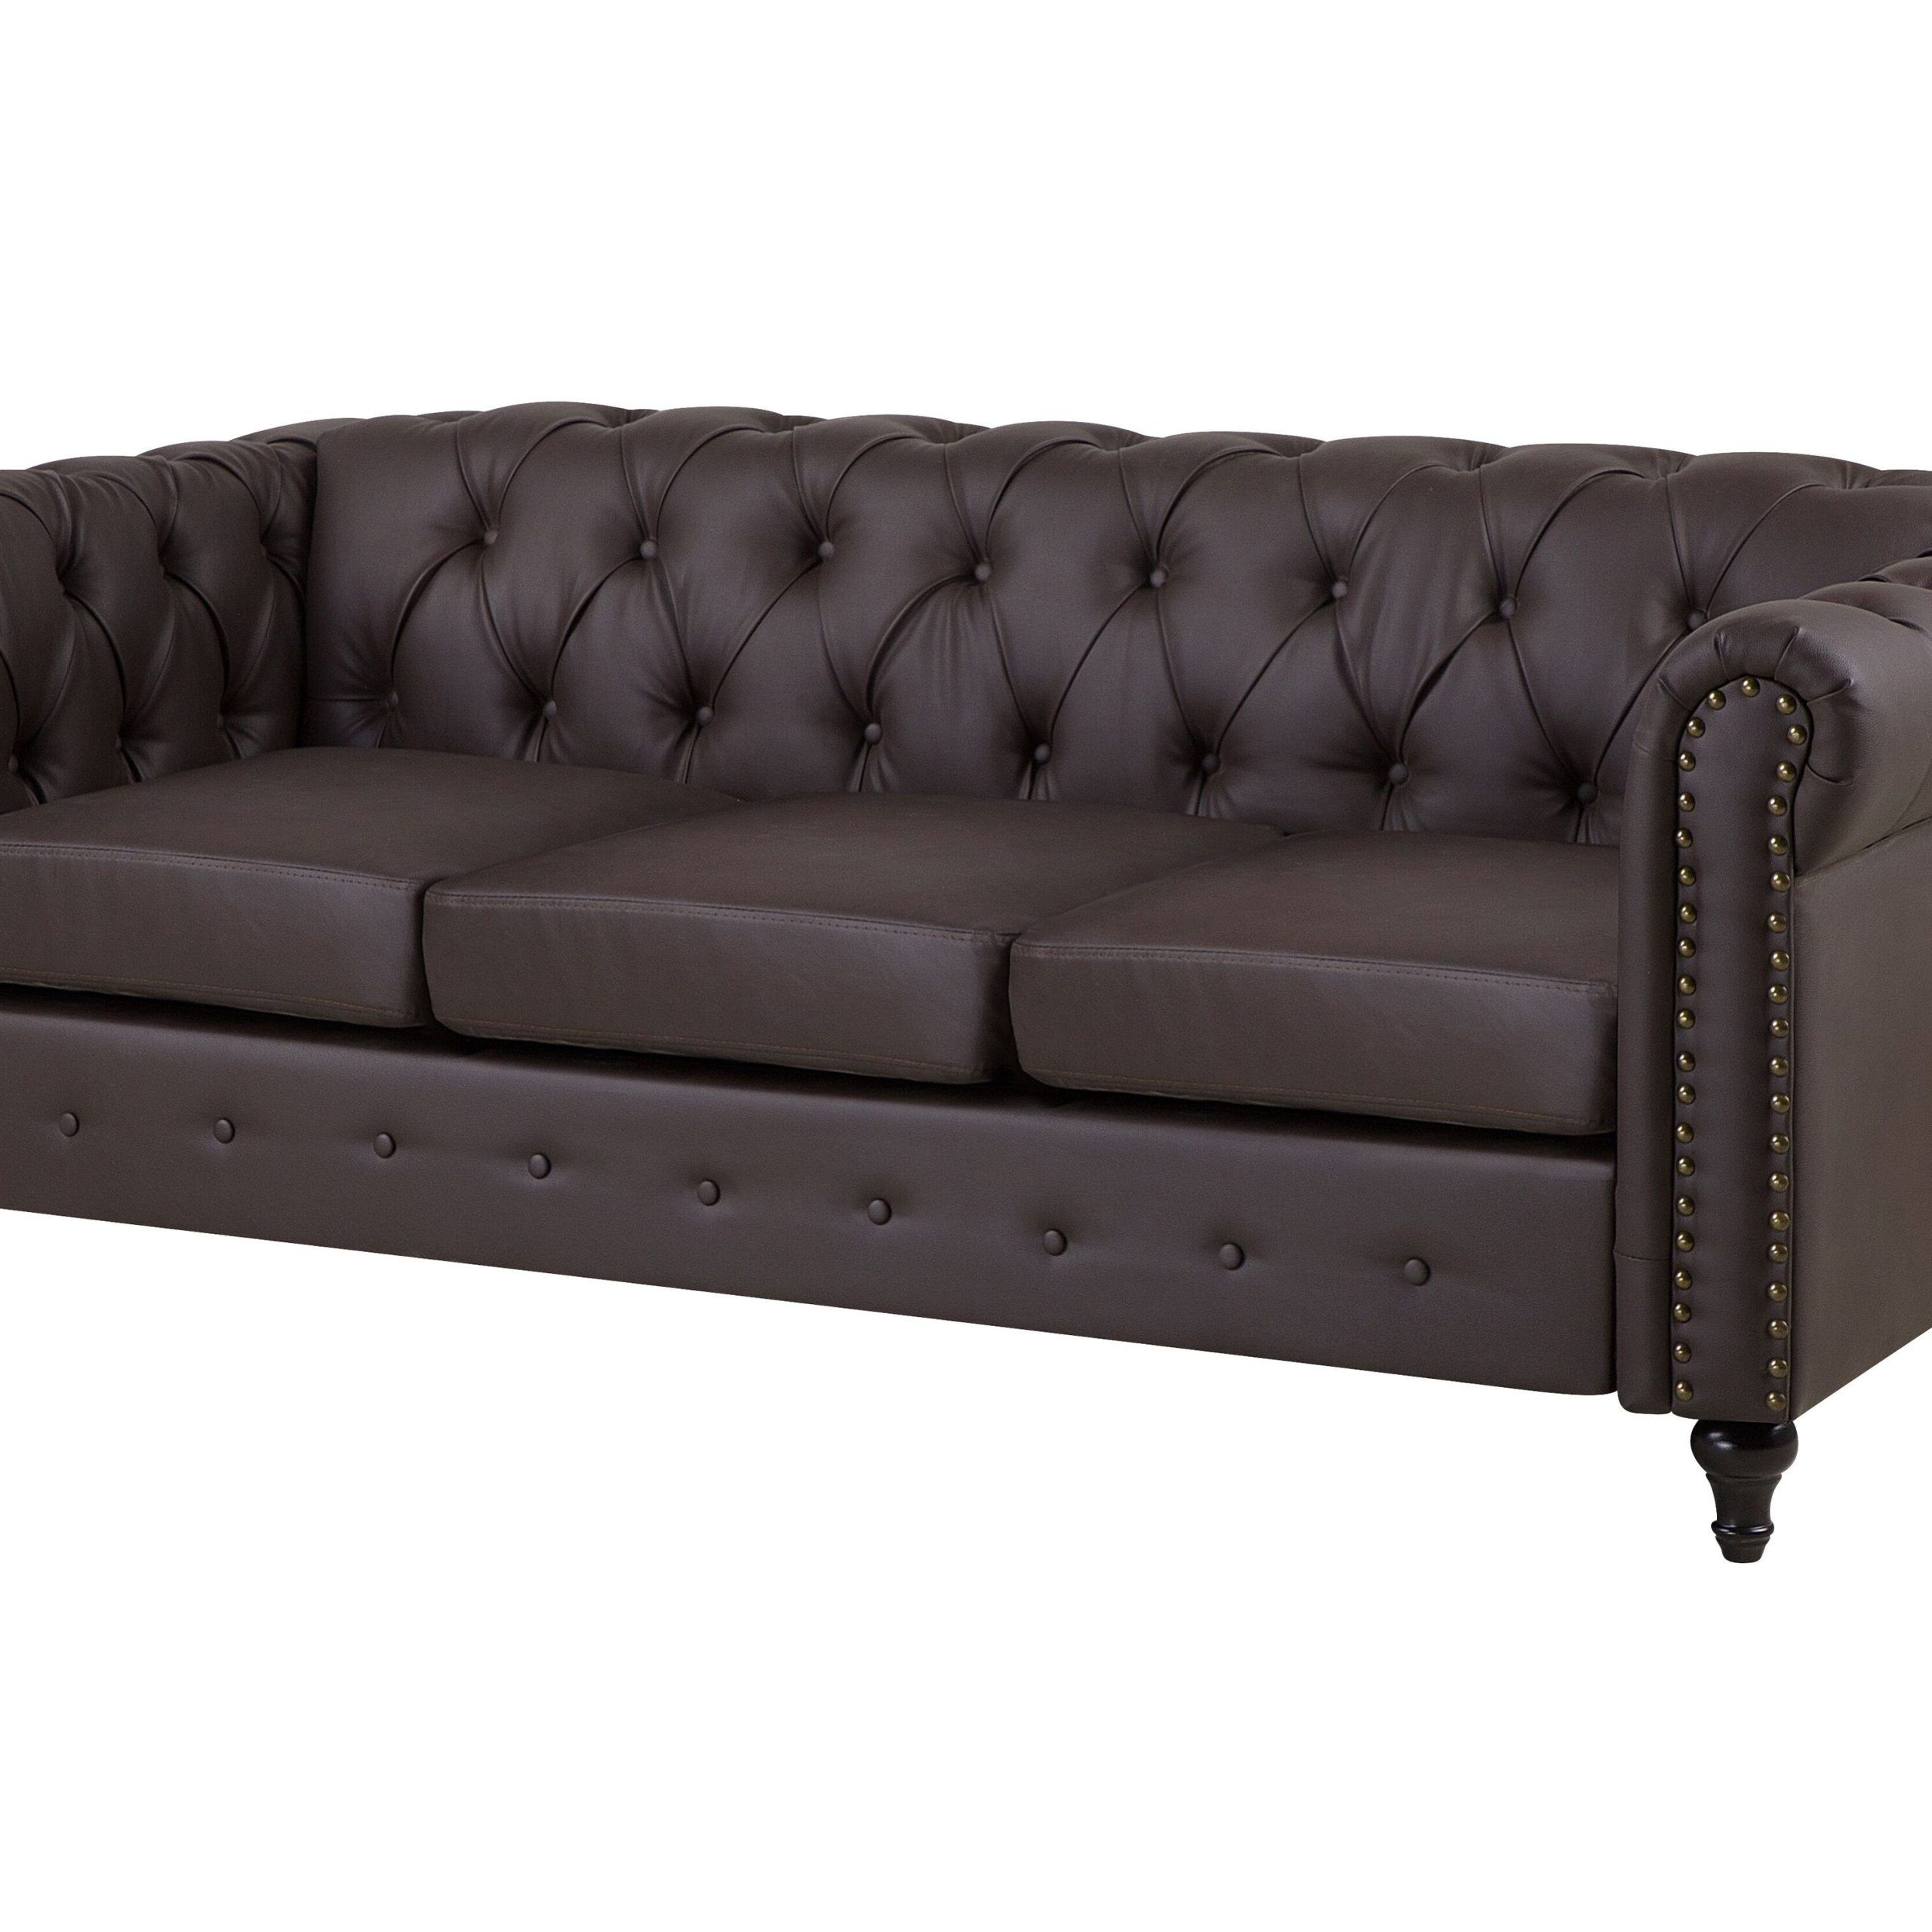 3 Seater Faux Leather Sofa Brown Chesterfield | Beliani.co (View 4 of 20)